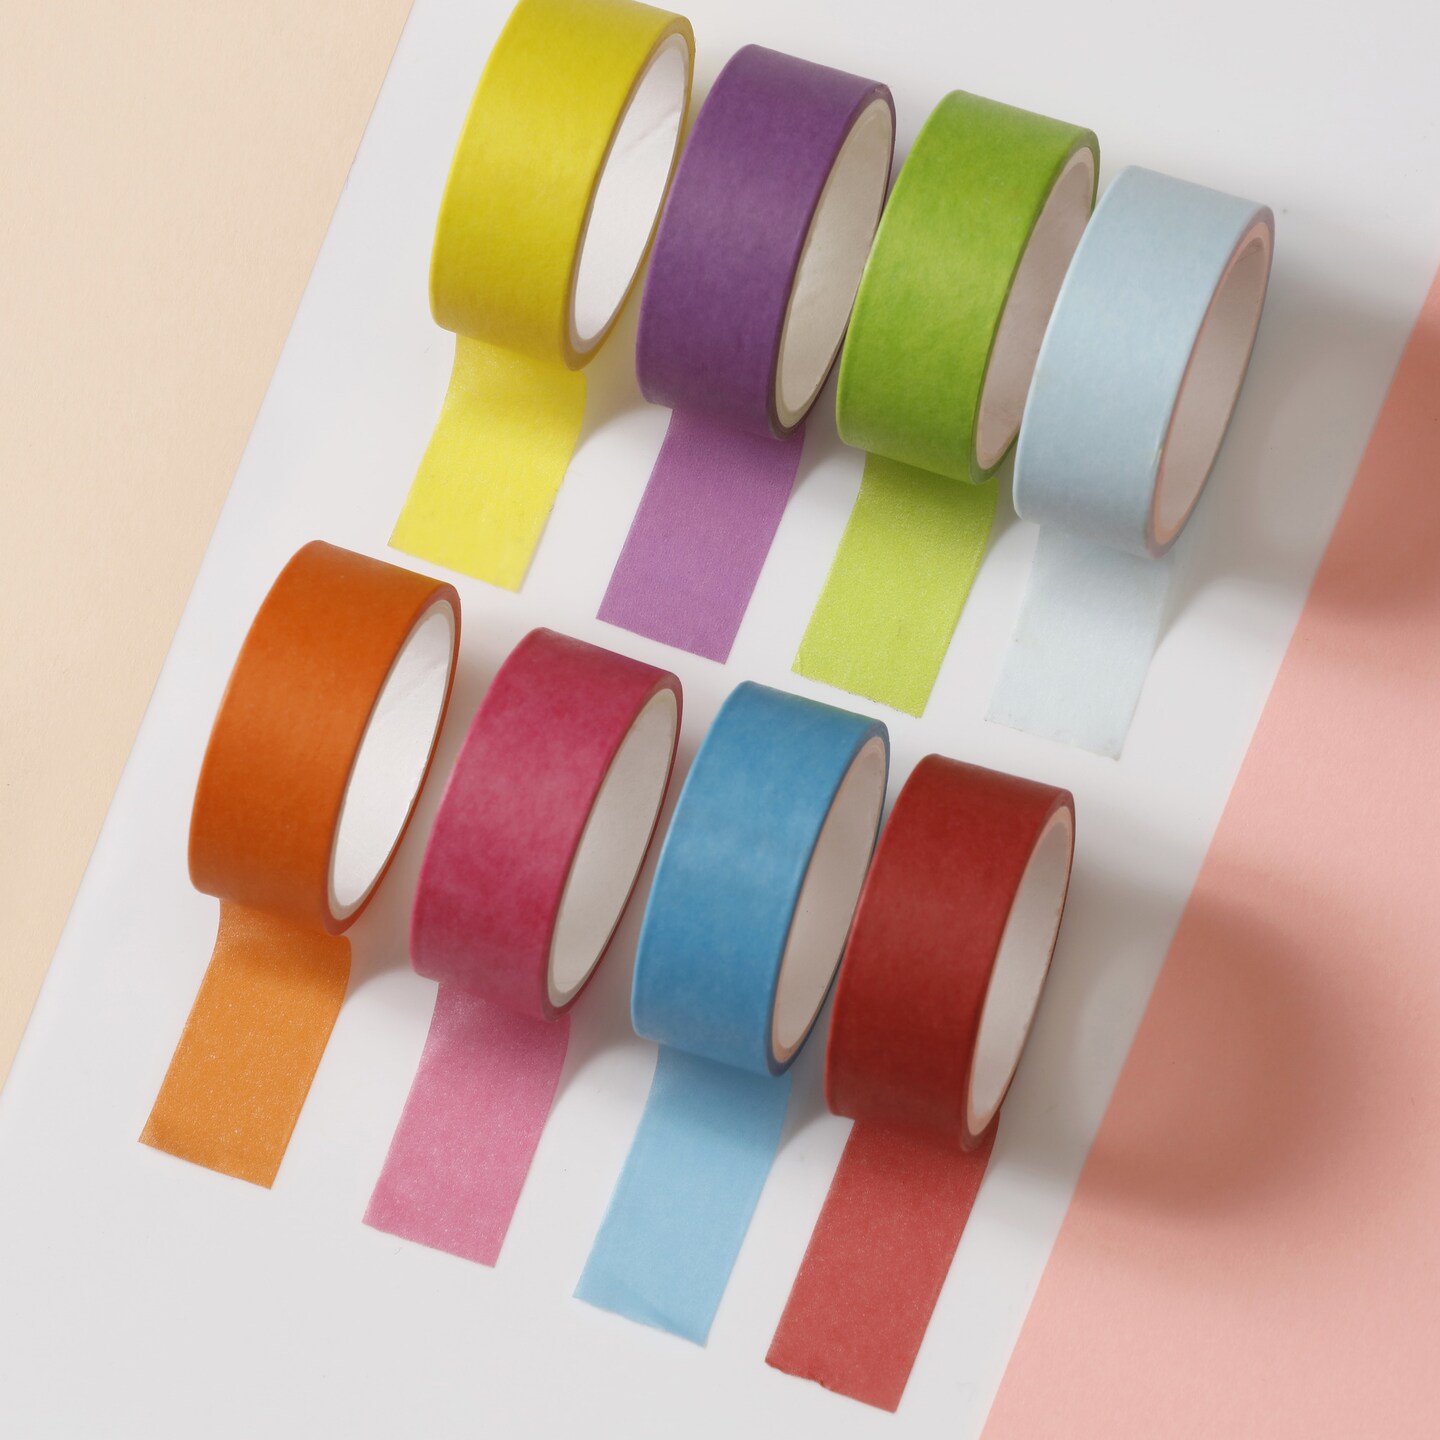 Incraftables Colored Masking Tape (8 Colors). Assorted Colorful Craft Tape 10 Feet x &#xBD; Inch Rolls. Rainbow Colored Painters Tape. Multi-Color Masking Tape for Arts &#x26; Crafts, Labeling, KIds &#x26; Teachers